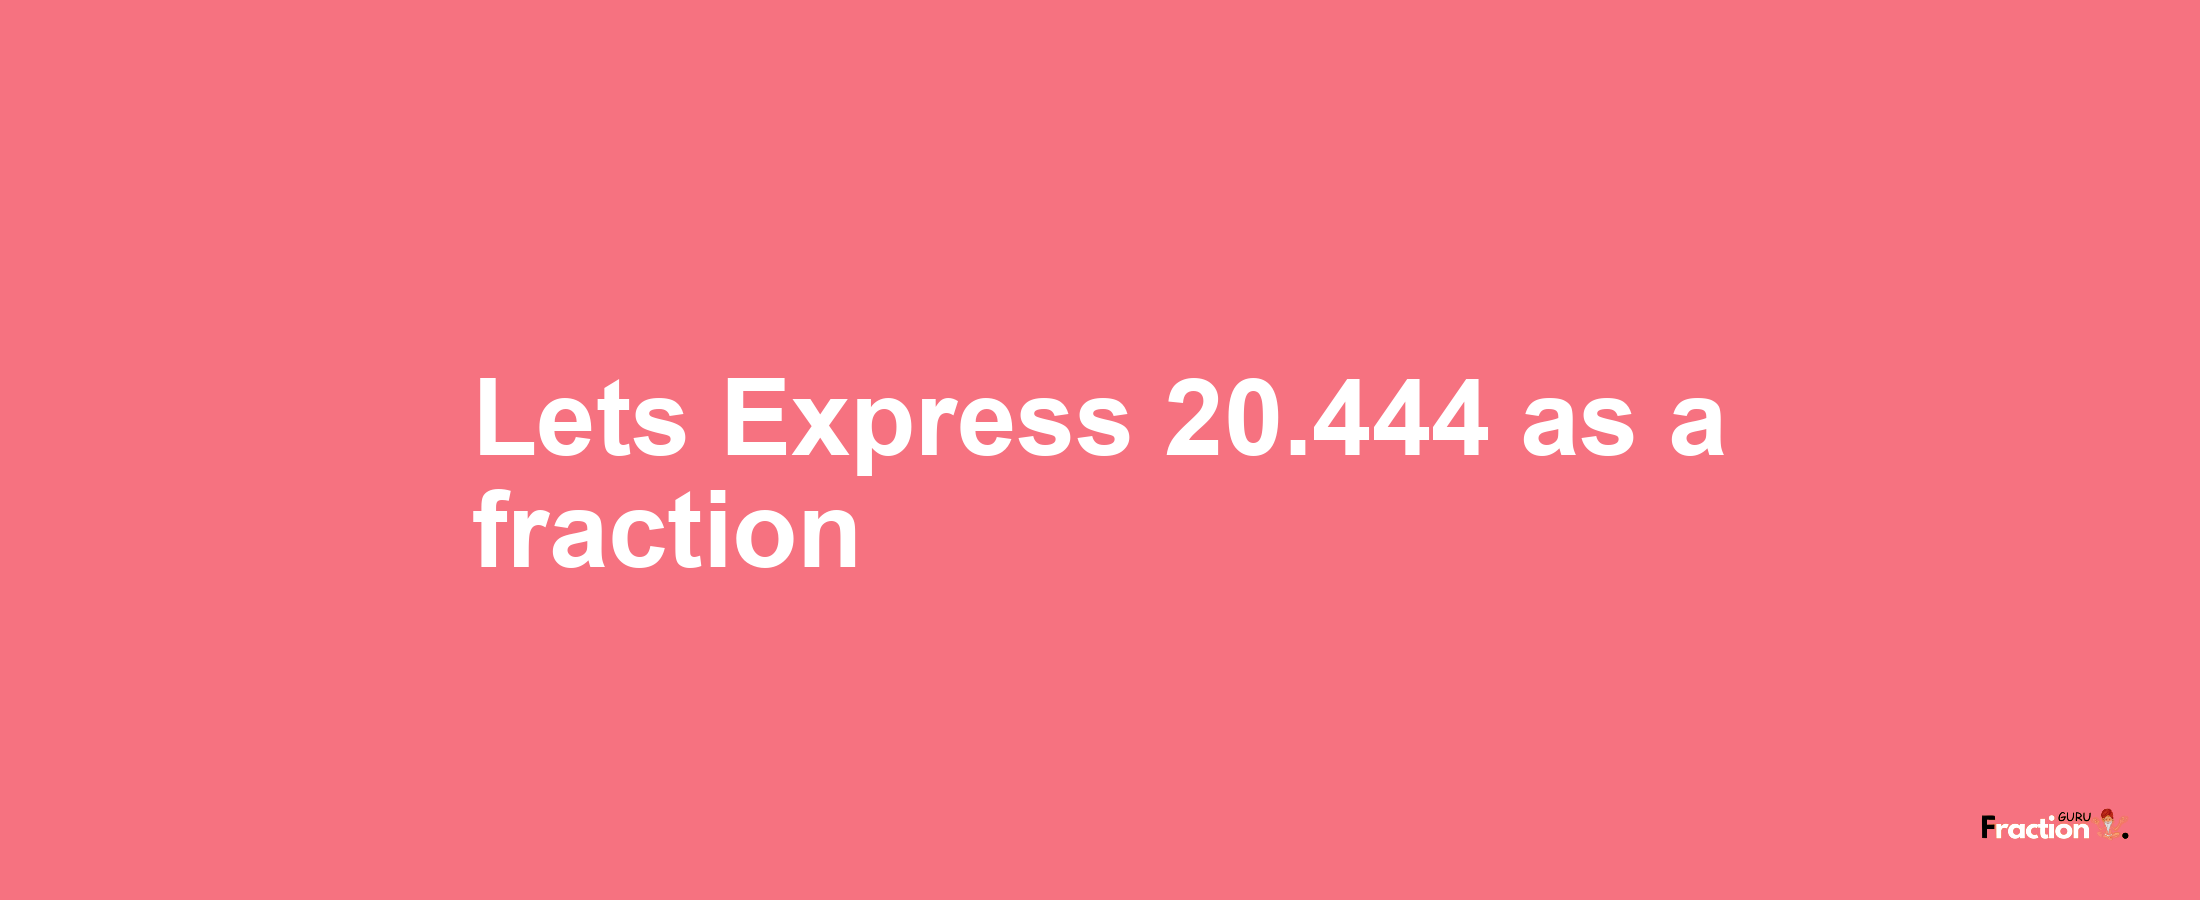 Lets Express 20.444 as afraction